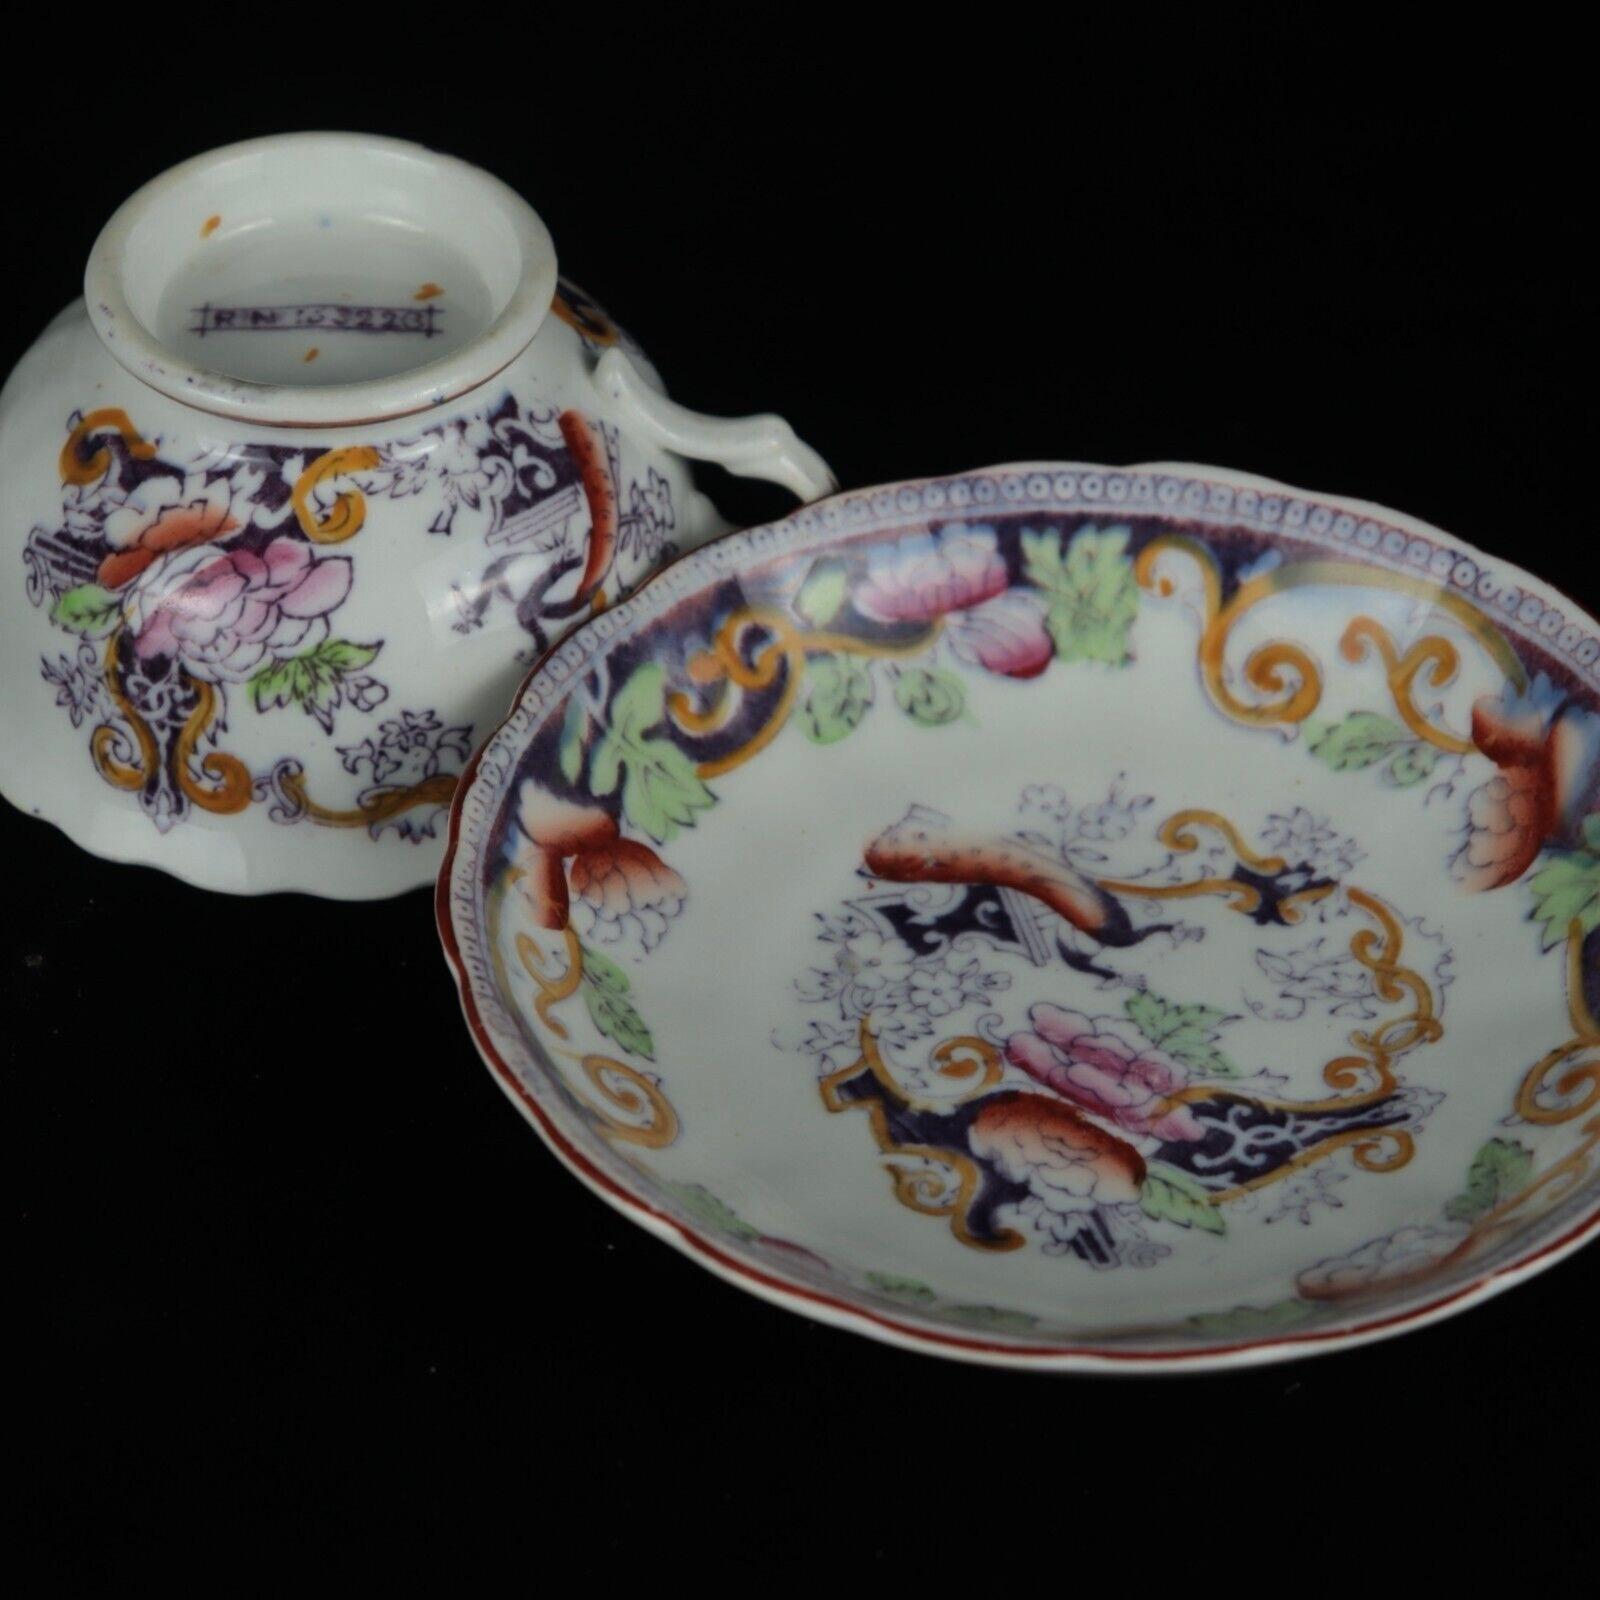 Pair of Antique 1890 English Bone China Tea Cup and Saucer Sets For Sale 1